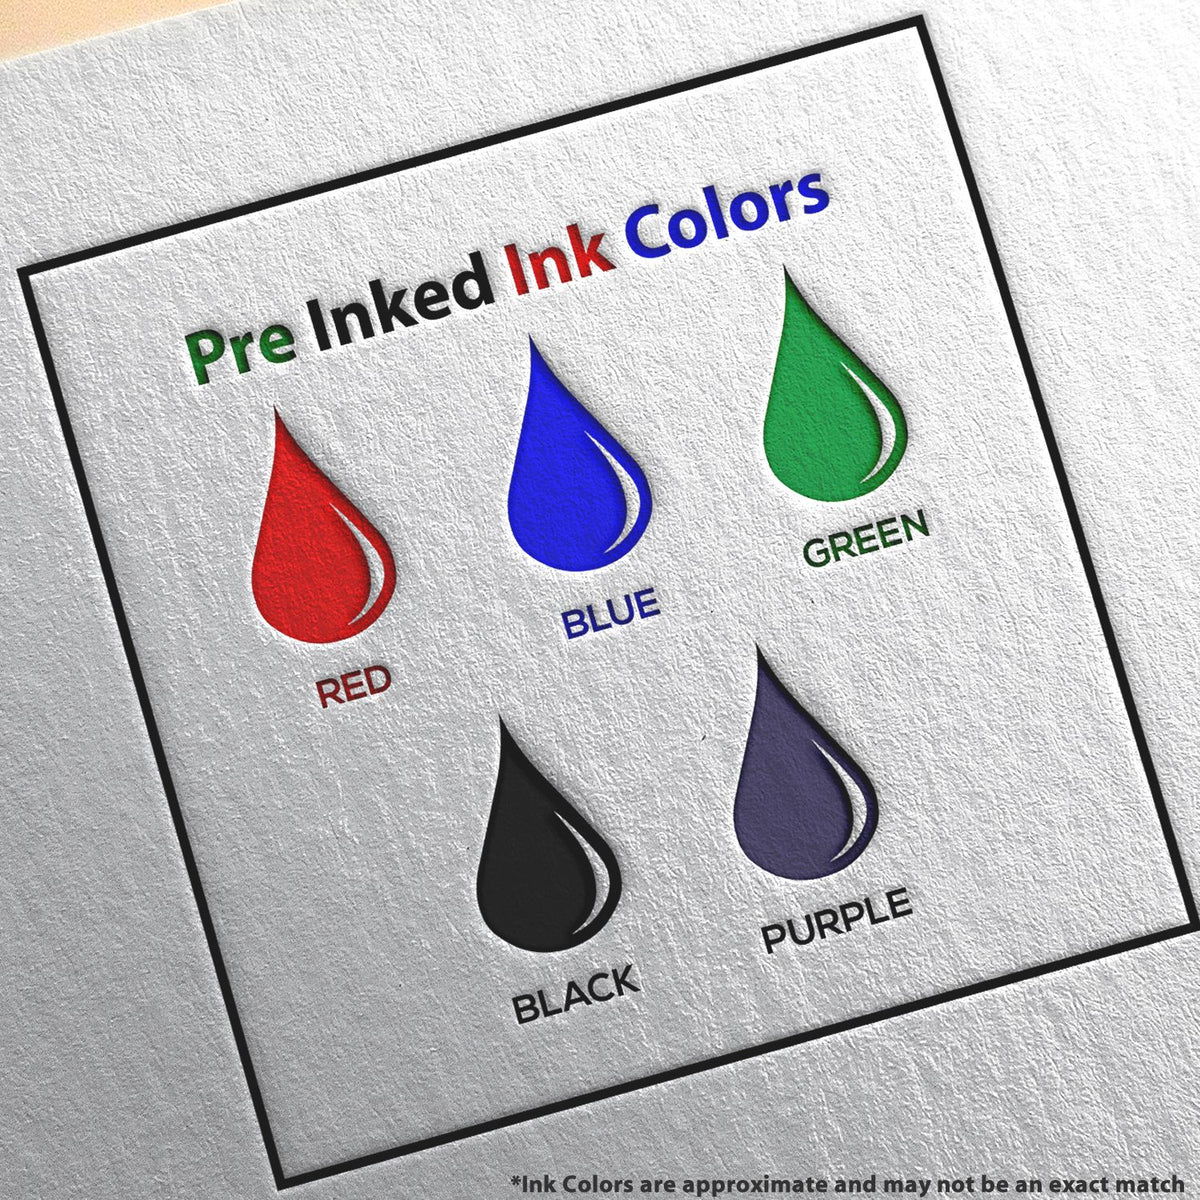 A picture showing the different ink colors or hues available for the Premium MaxLight Pre-Inked Massachusetts Engineering Stamp product.